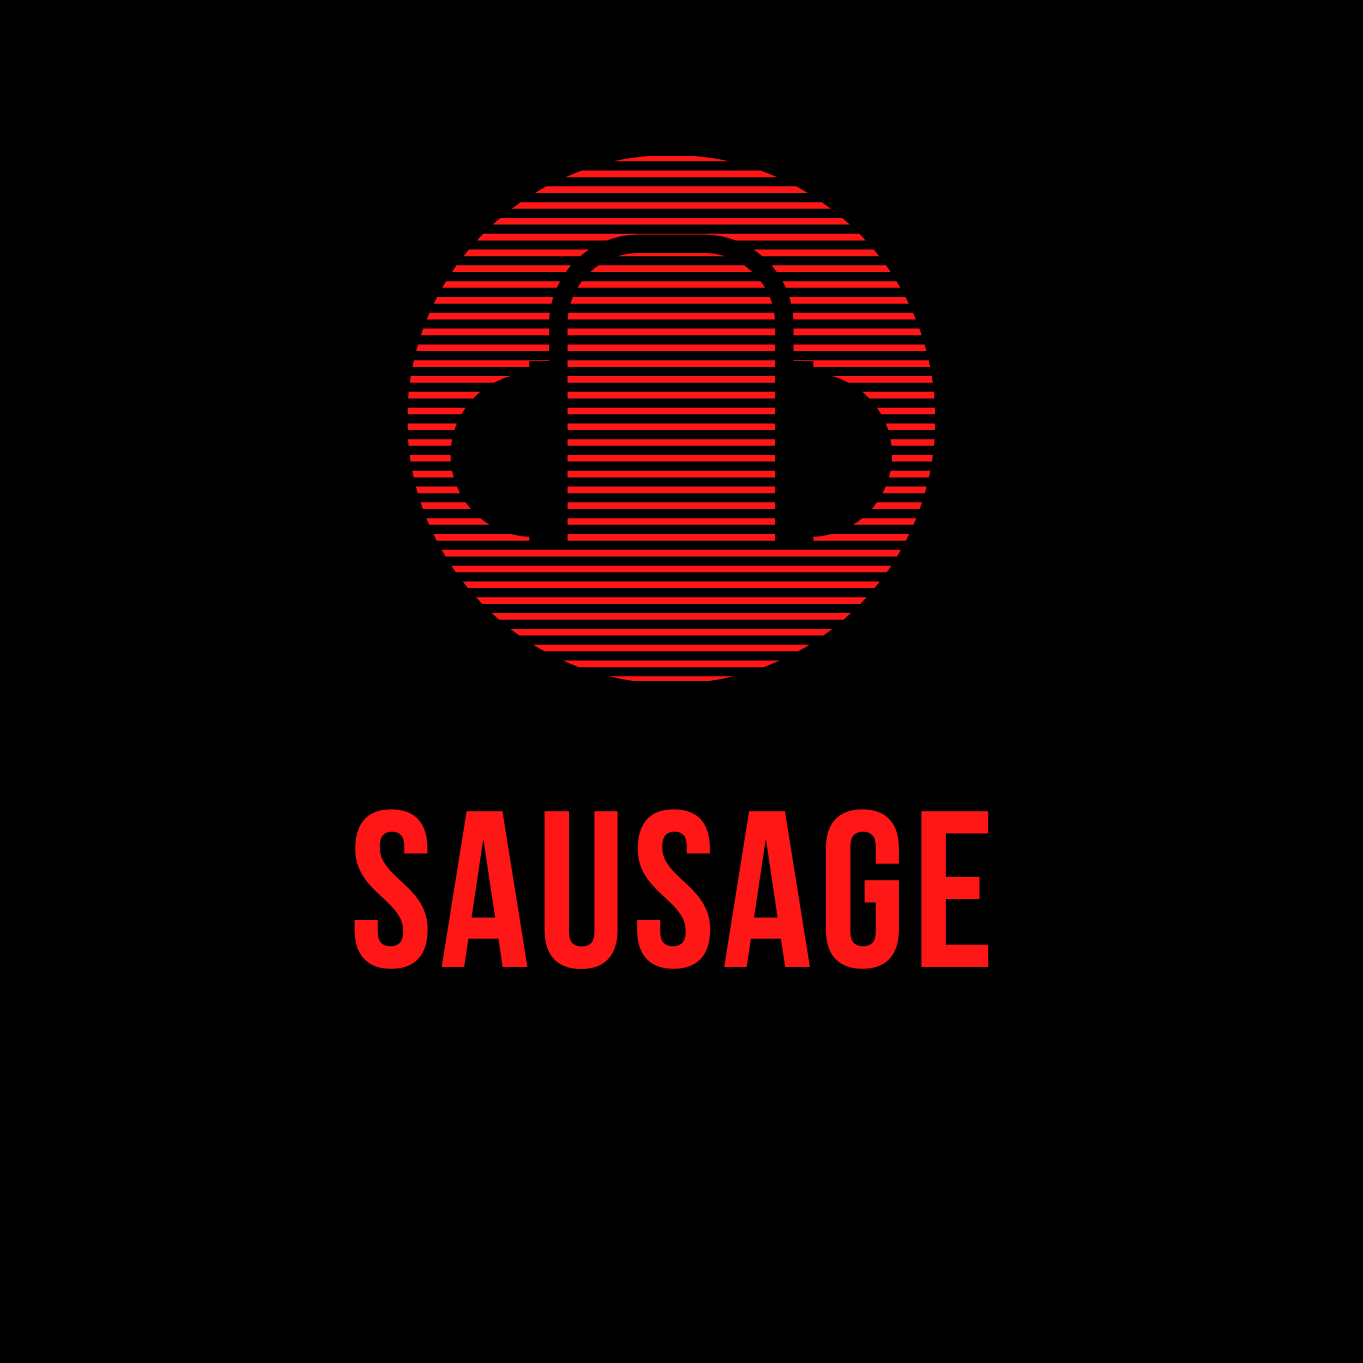 (: Sausage in the mix - House Music all life long :)